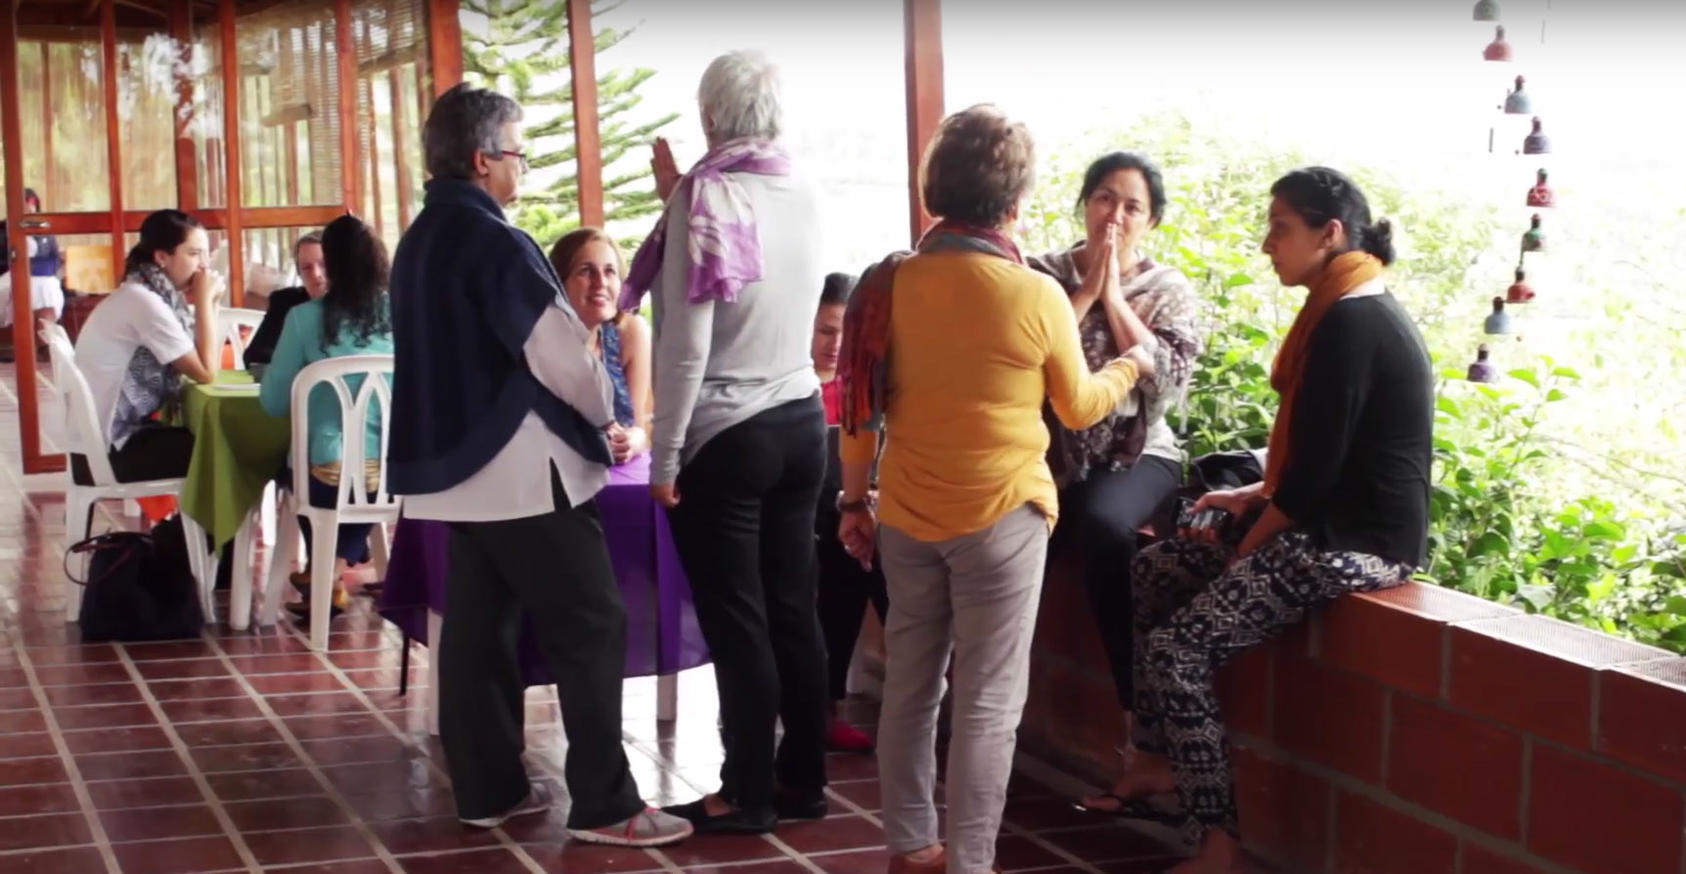 Colombian women mediators taking part in a dialogue in Colombia. Photo by USIP